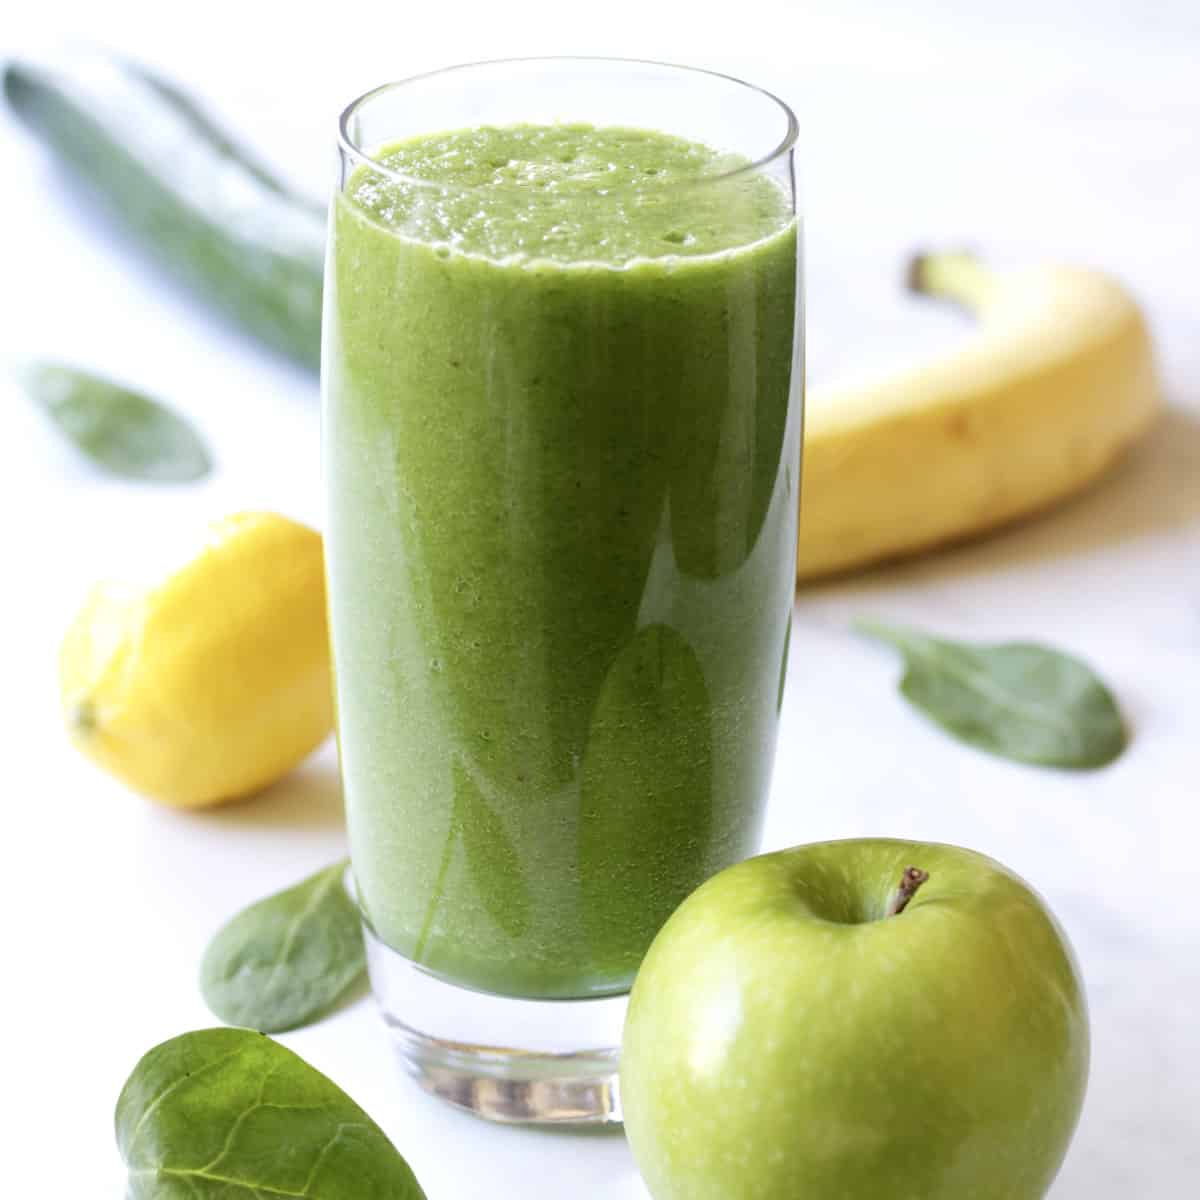 green smoothie in glass surrounded by green apple, banana, lemon, cucumber, and spinach leaves